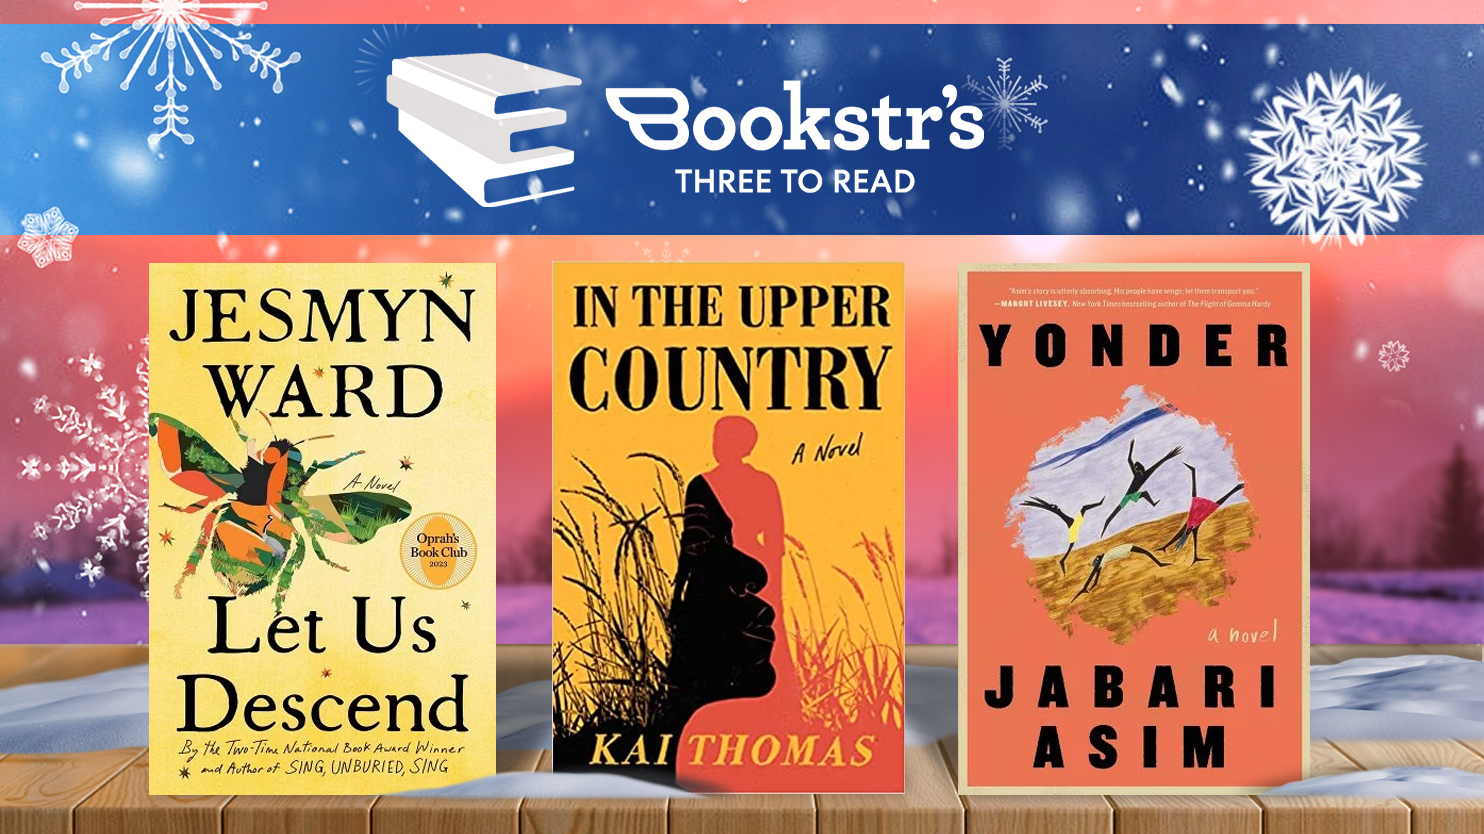 Winter season banner with the book covers for "Let Us Descend" by Jesmyn Ward, "In The Upper Country" by Kai Thomas, and "Yonder" by Jabari Asim.